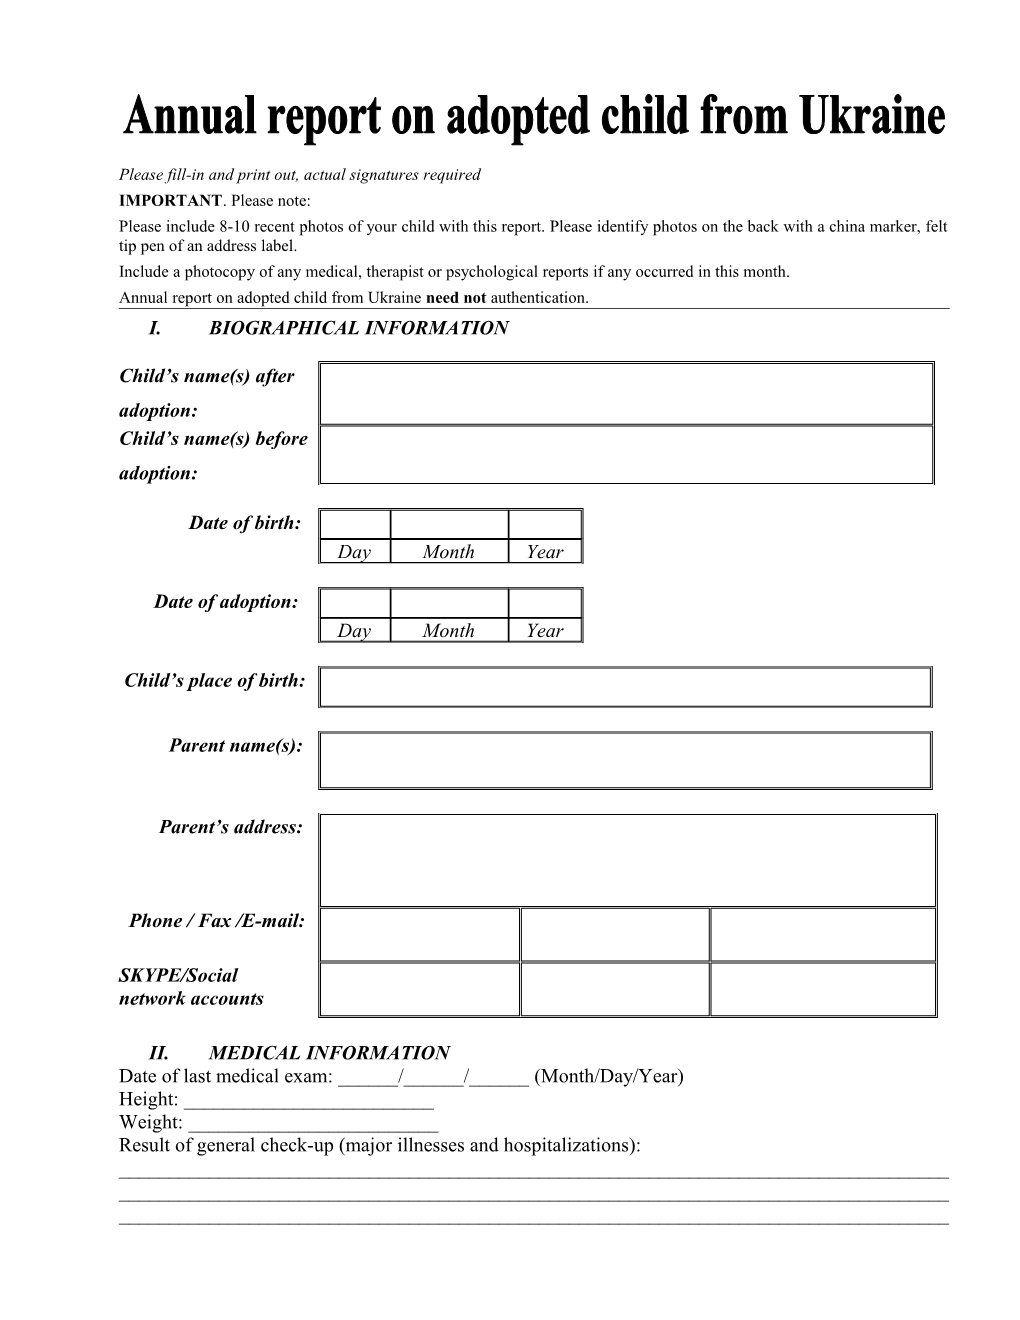 Please Fill-In and Print Out, Actual Signatures Required